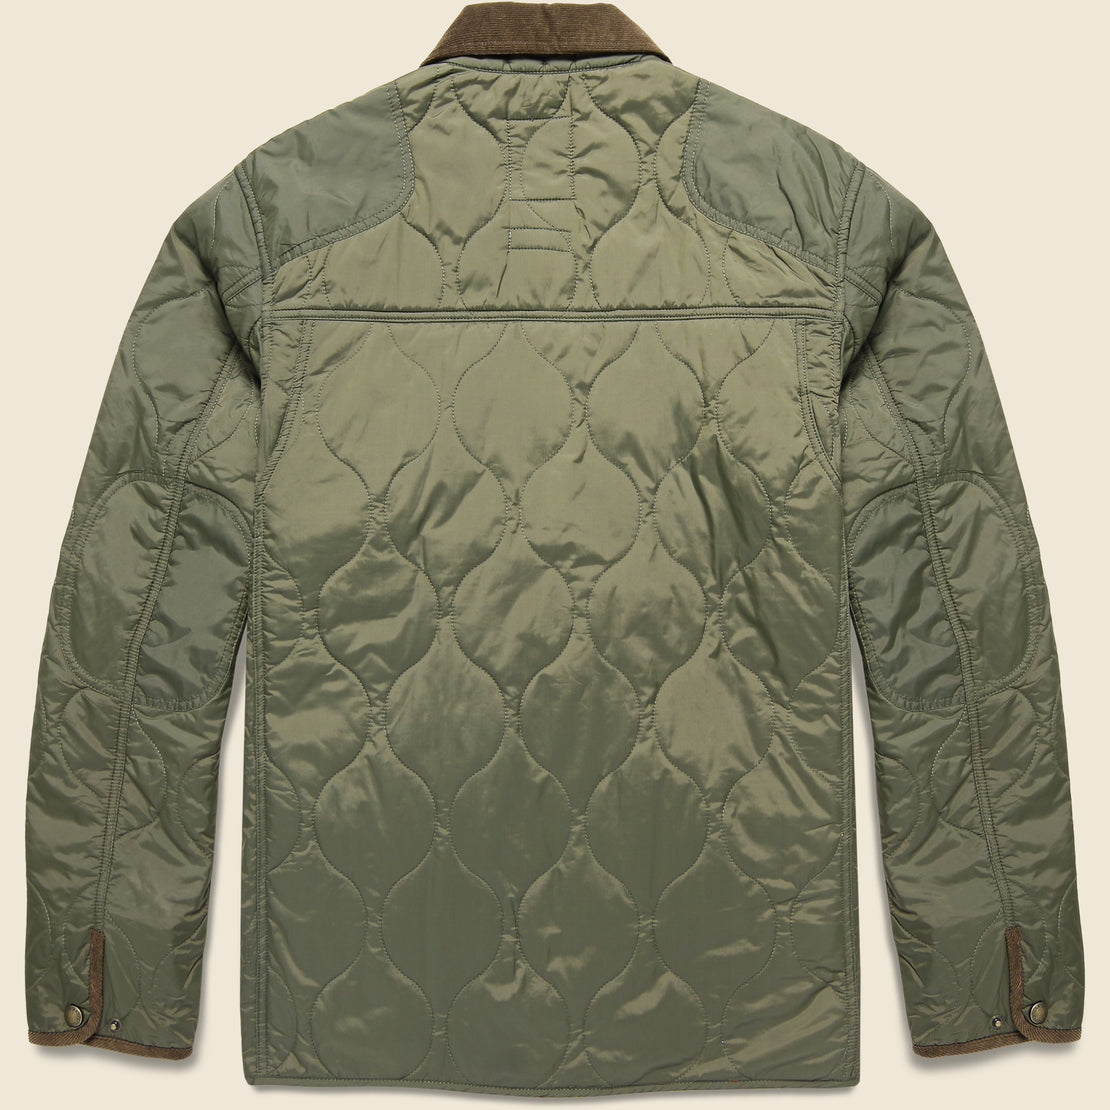 Andrew Light Weight Quilted Jacket - Olive - Grayers - STAG Provisions - Outerwear - Coat / Jacket